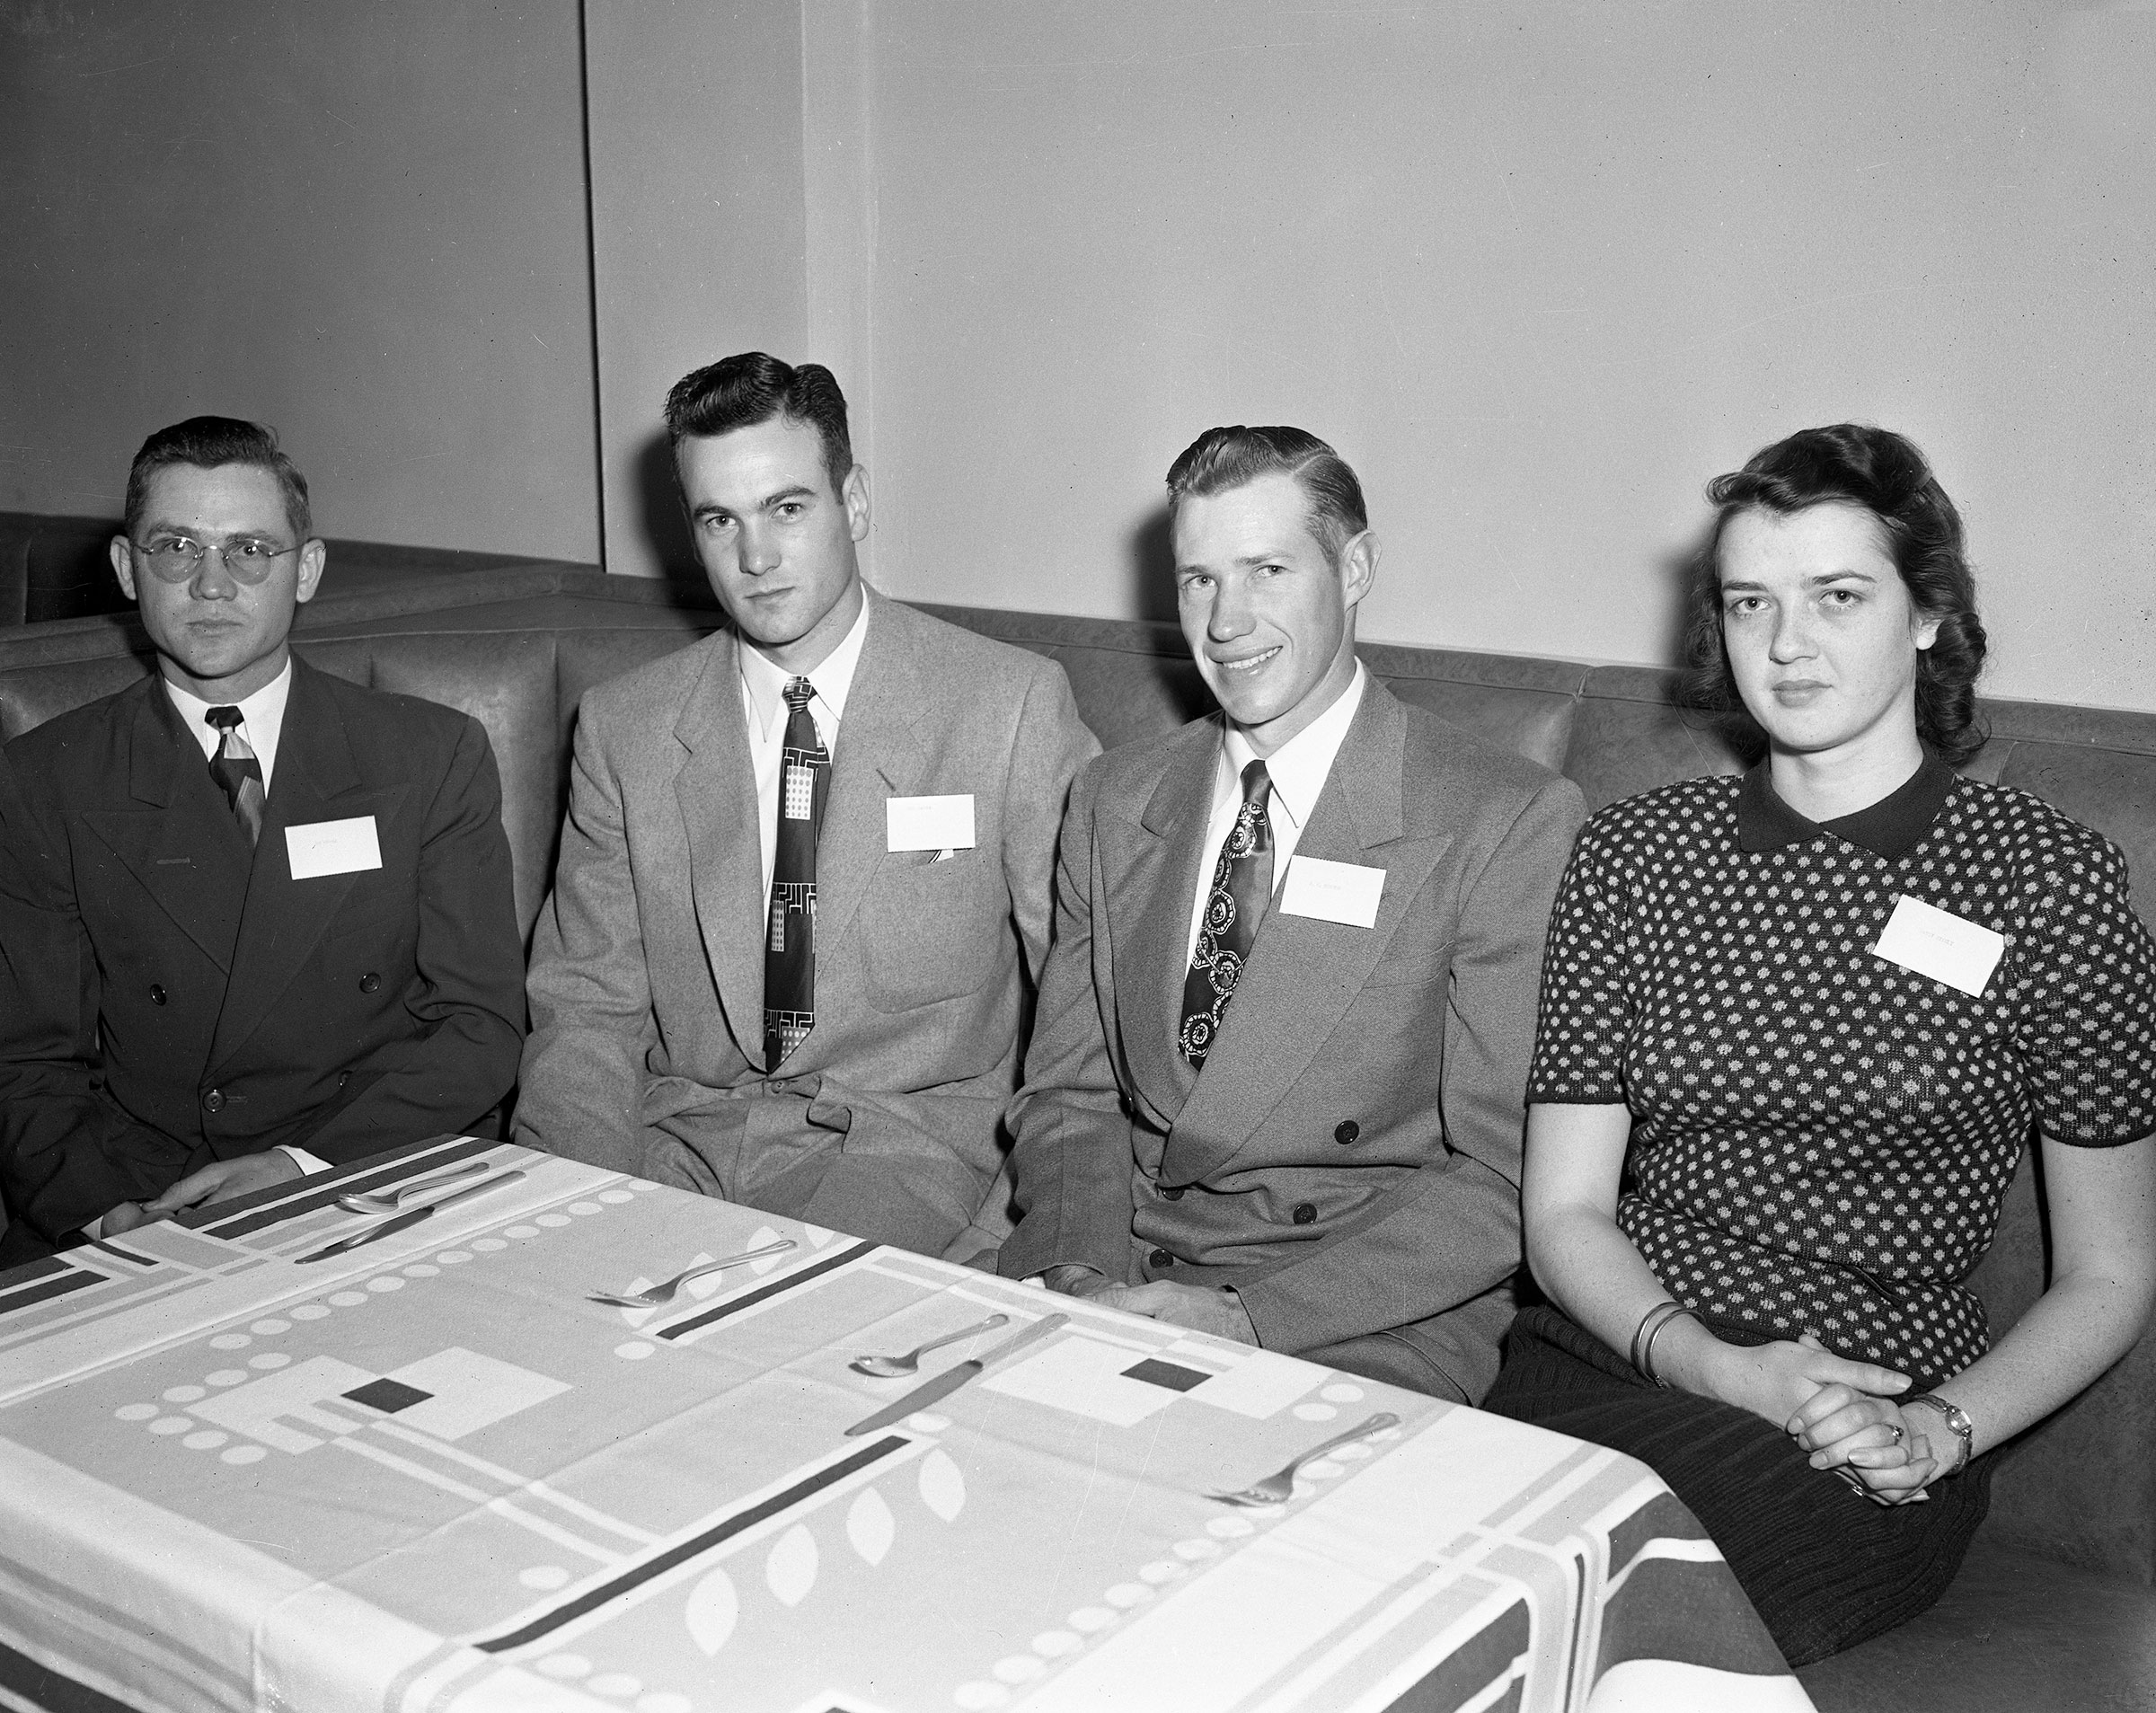 During the Cleveland County Junior Farm Bureau organizational banquet in Norman in 1953, more than 50 members selected officers to lead their newly formed group. The officers elected were (left to right) Joe Merkle and Bob Bates, Vice Presidents; J.C. Shroyer, President; and Patsy Steele, Secretary.